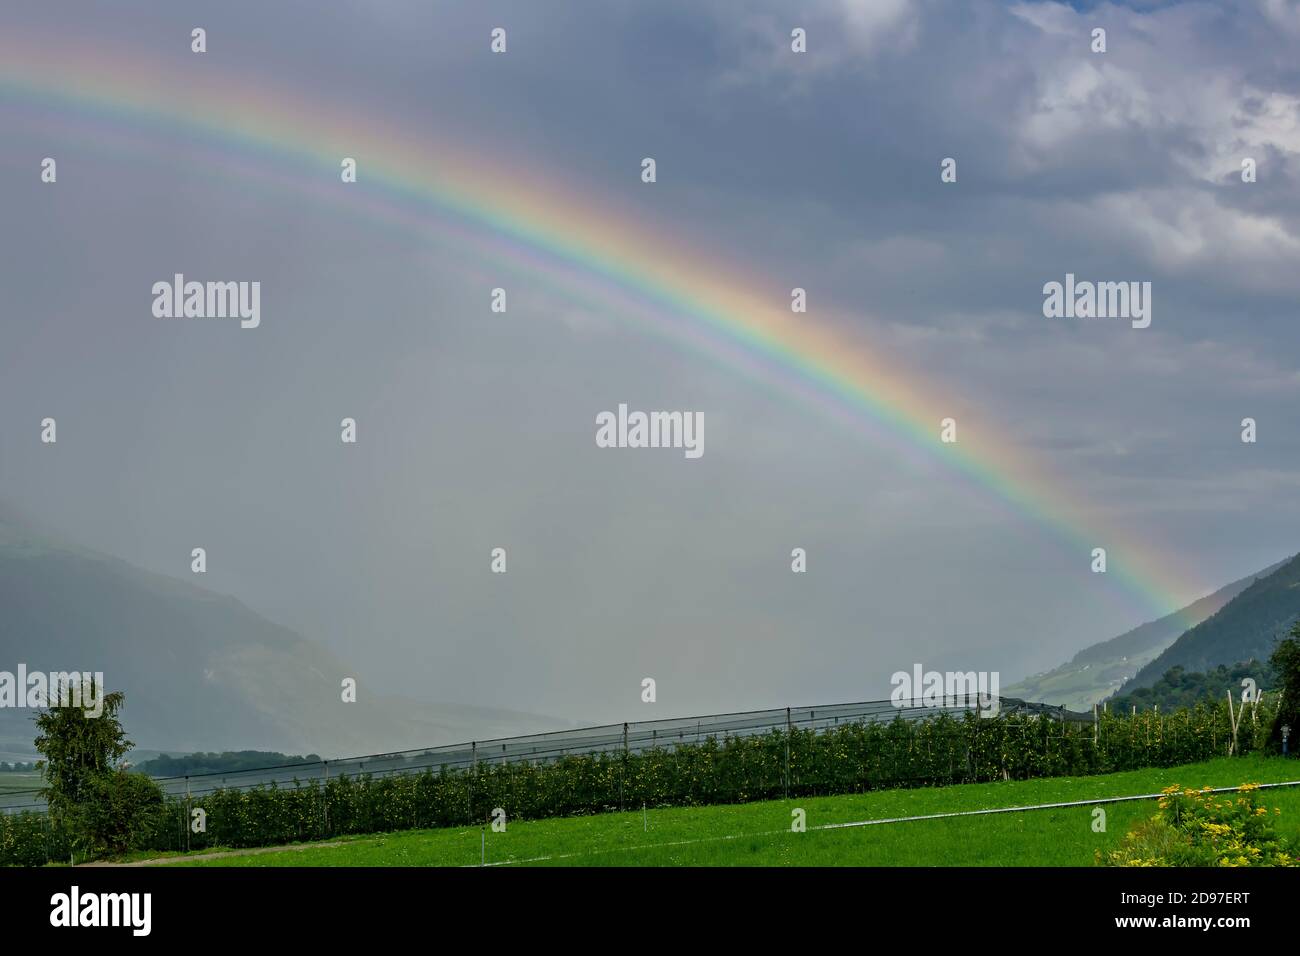 A large rainbow emerges from the clouds over an apple planted field in Val Venosta, Prato allo Stelvio, Italy Stock Photo